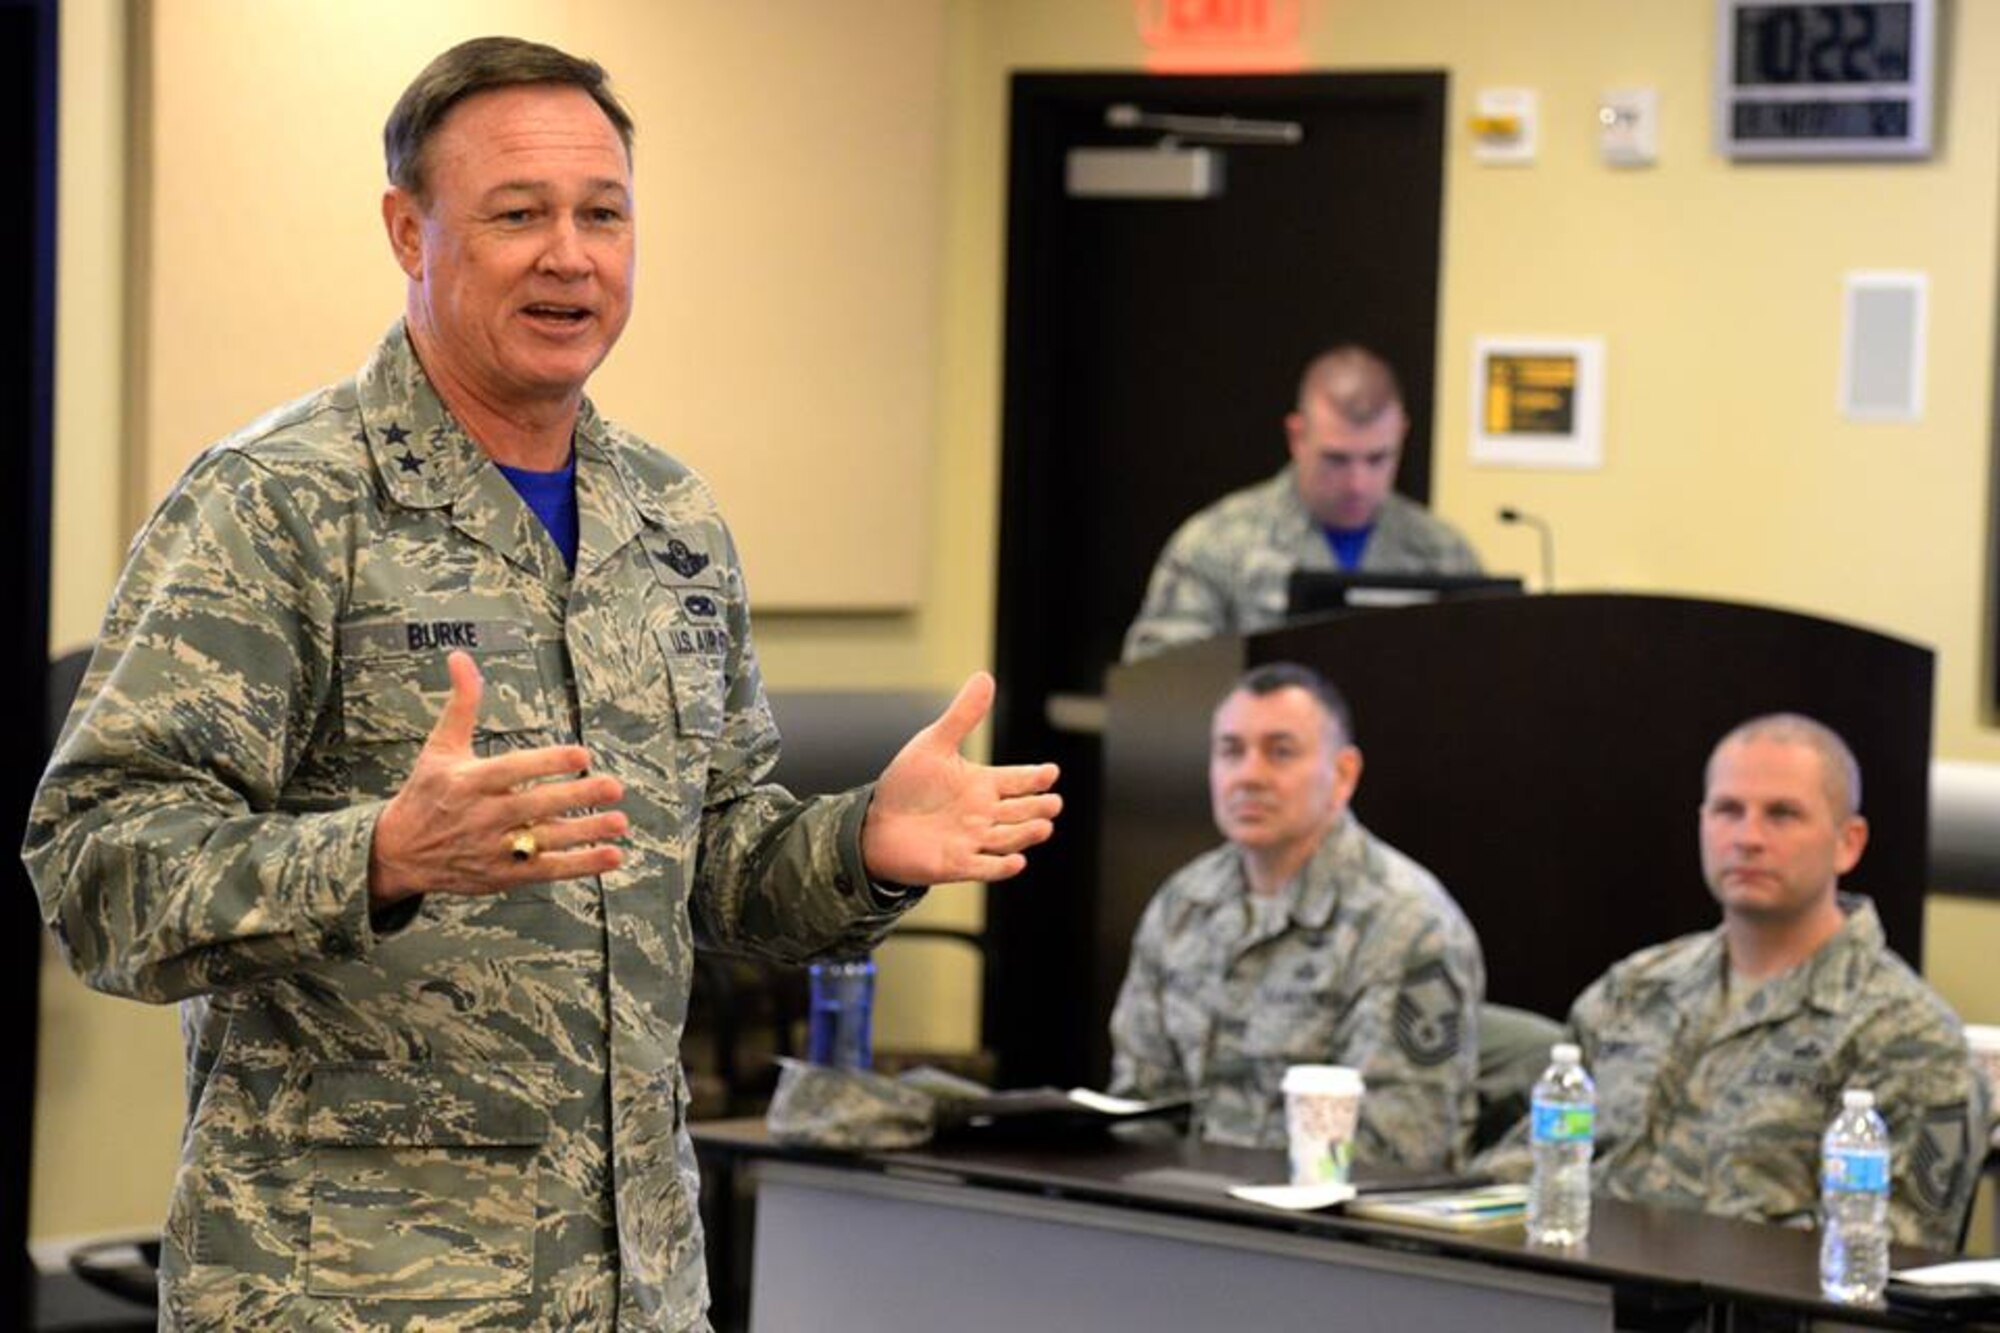 Air Force District of Washington Commander Maj. Gen. Darryl Burke speaks to Chief Master Sergeants and selectees during the closing remarks of the Chief Master Sergeant Orientation Course on Joint Base Andrews, Md., Mar. 4, 2016. More than 40 newly-minted chiefs from the National Capital Region are attending this week-long comprehensive orientation designed to engage them in conversations which will help them excel in their new leadership positions. (U.S. Air Force photo/Tech Sgt. Matt Davis)